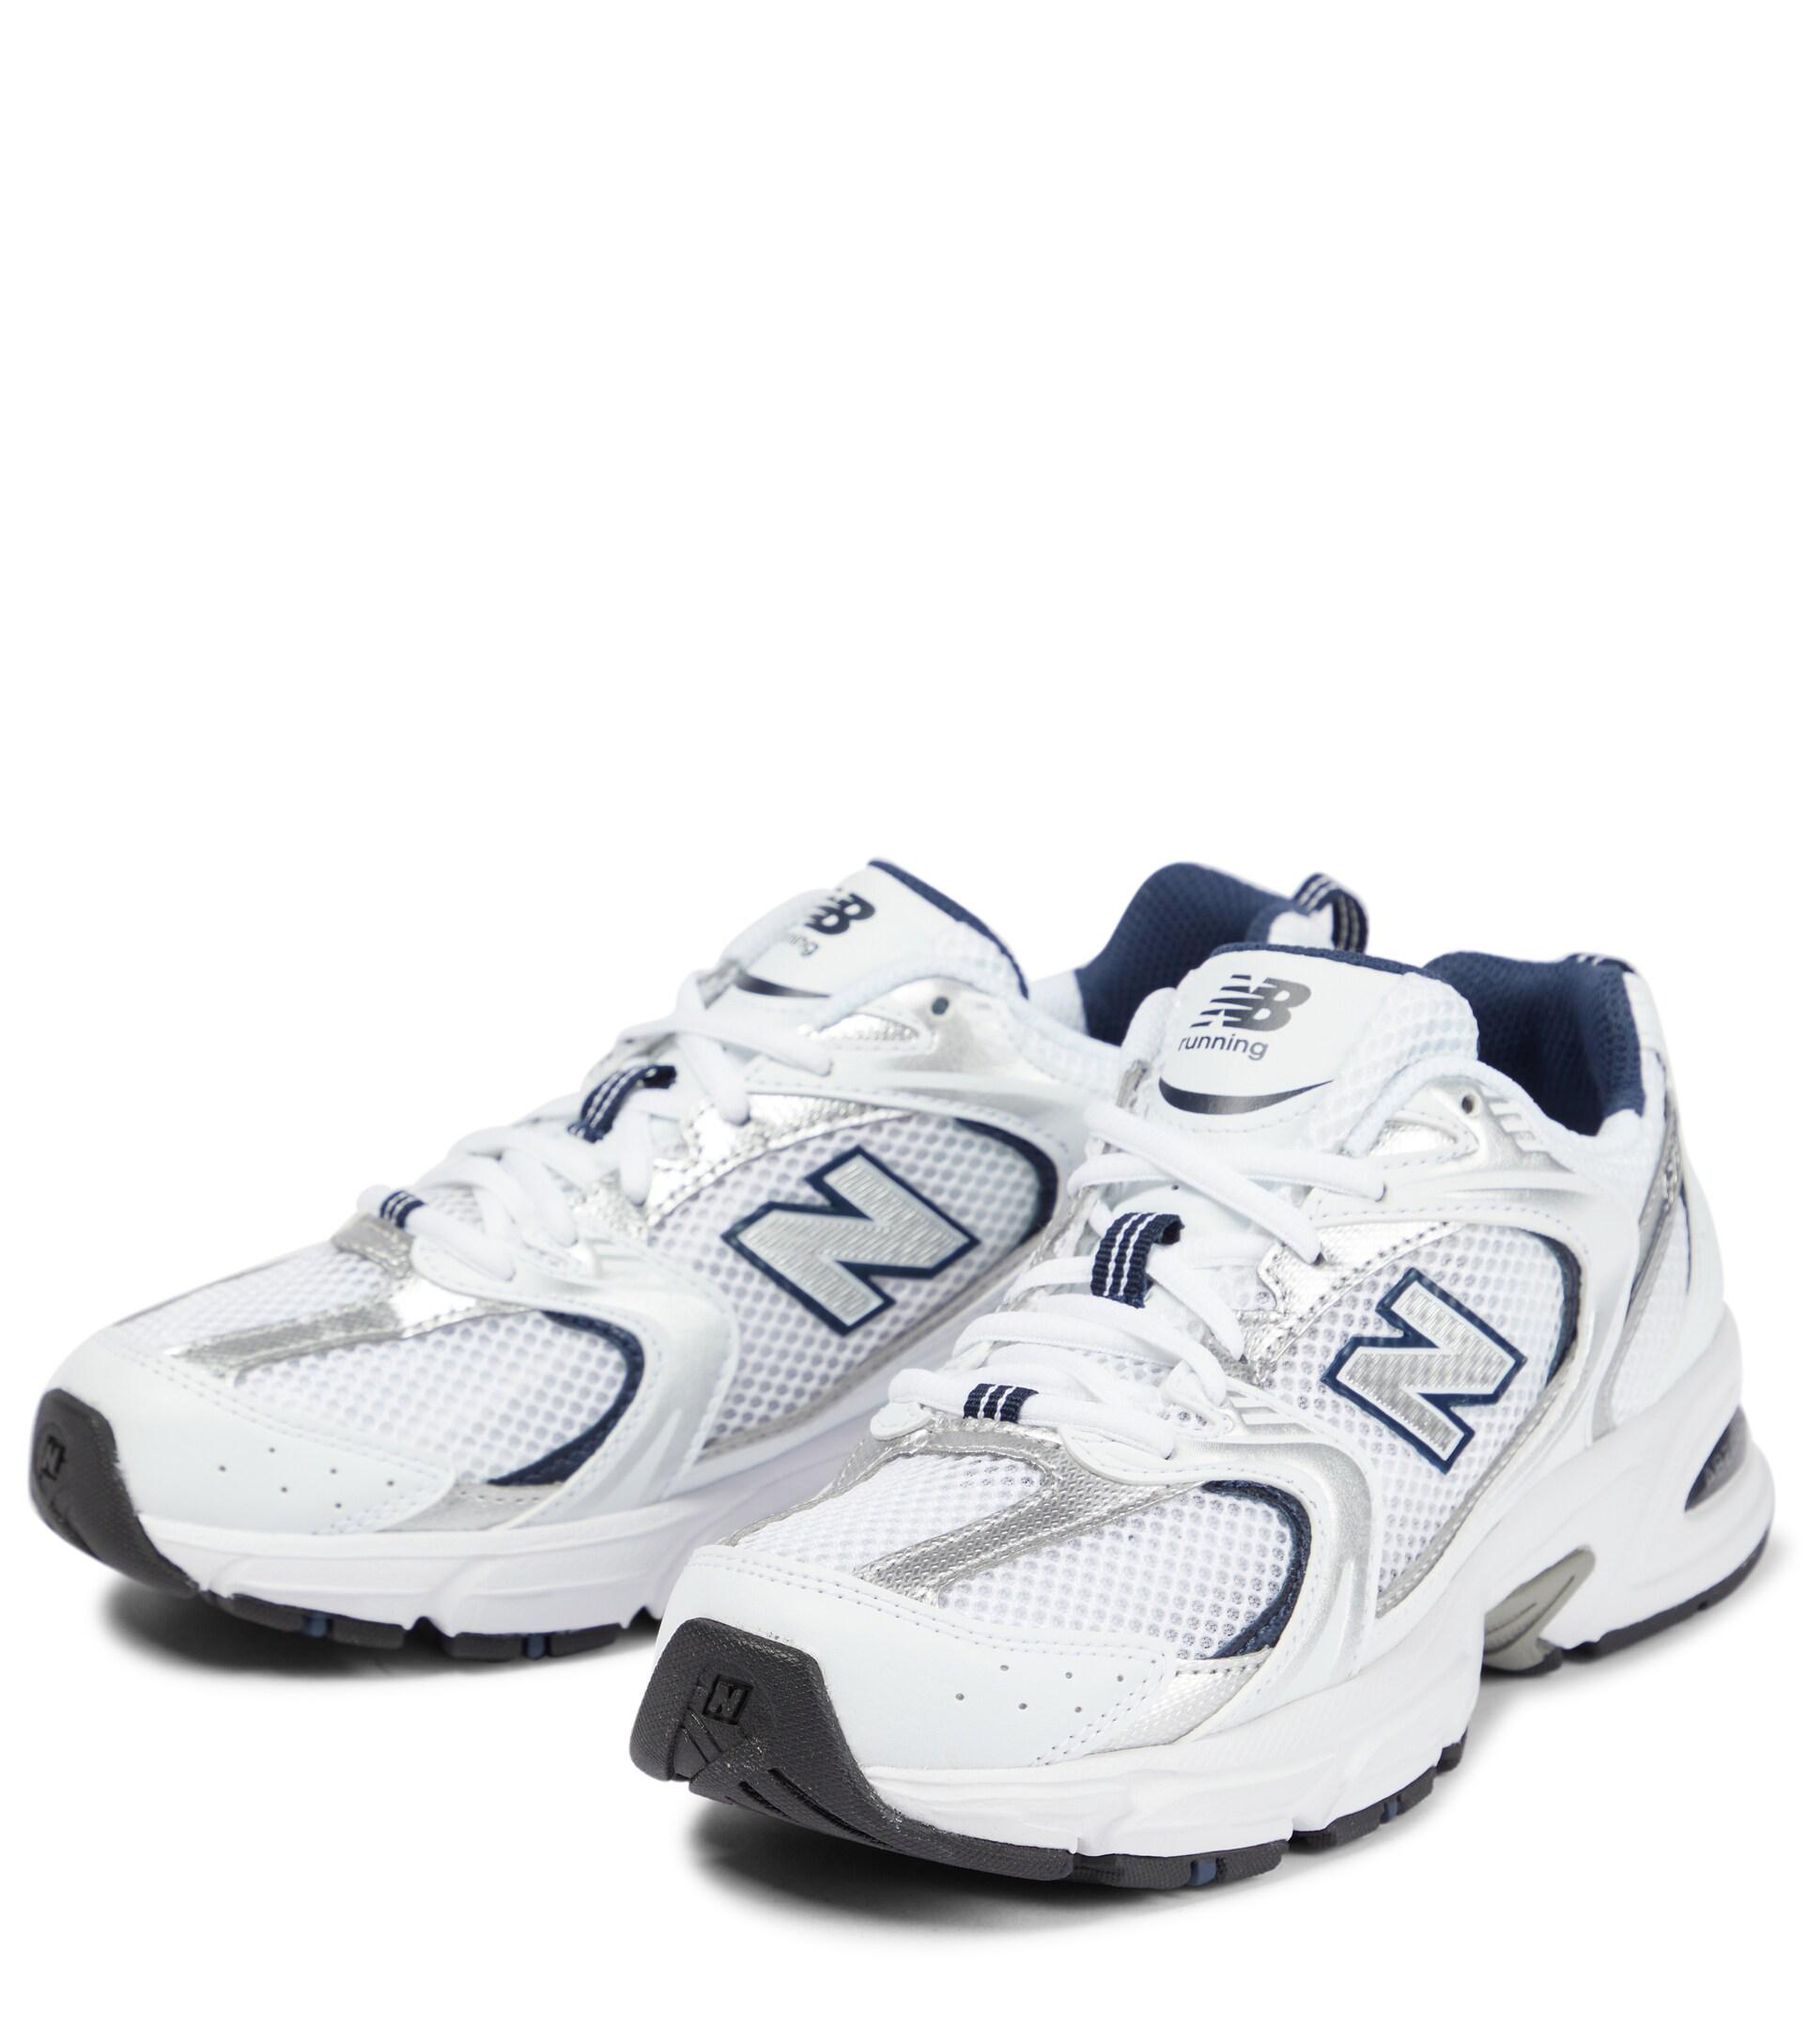 New Balance 530 Mesh Sneakers in White | Lyst